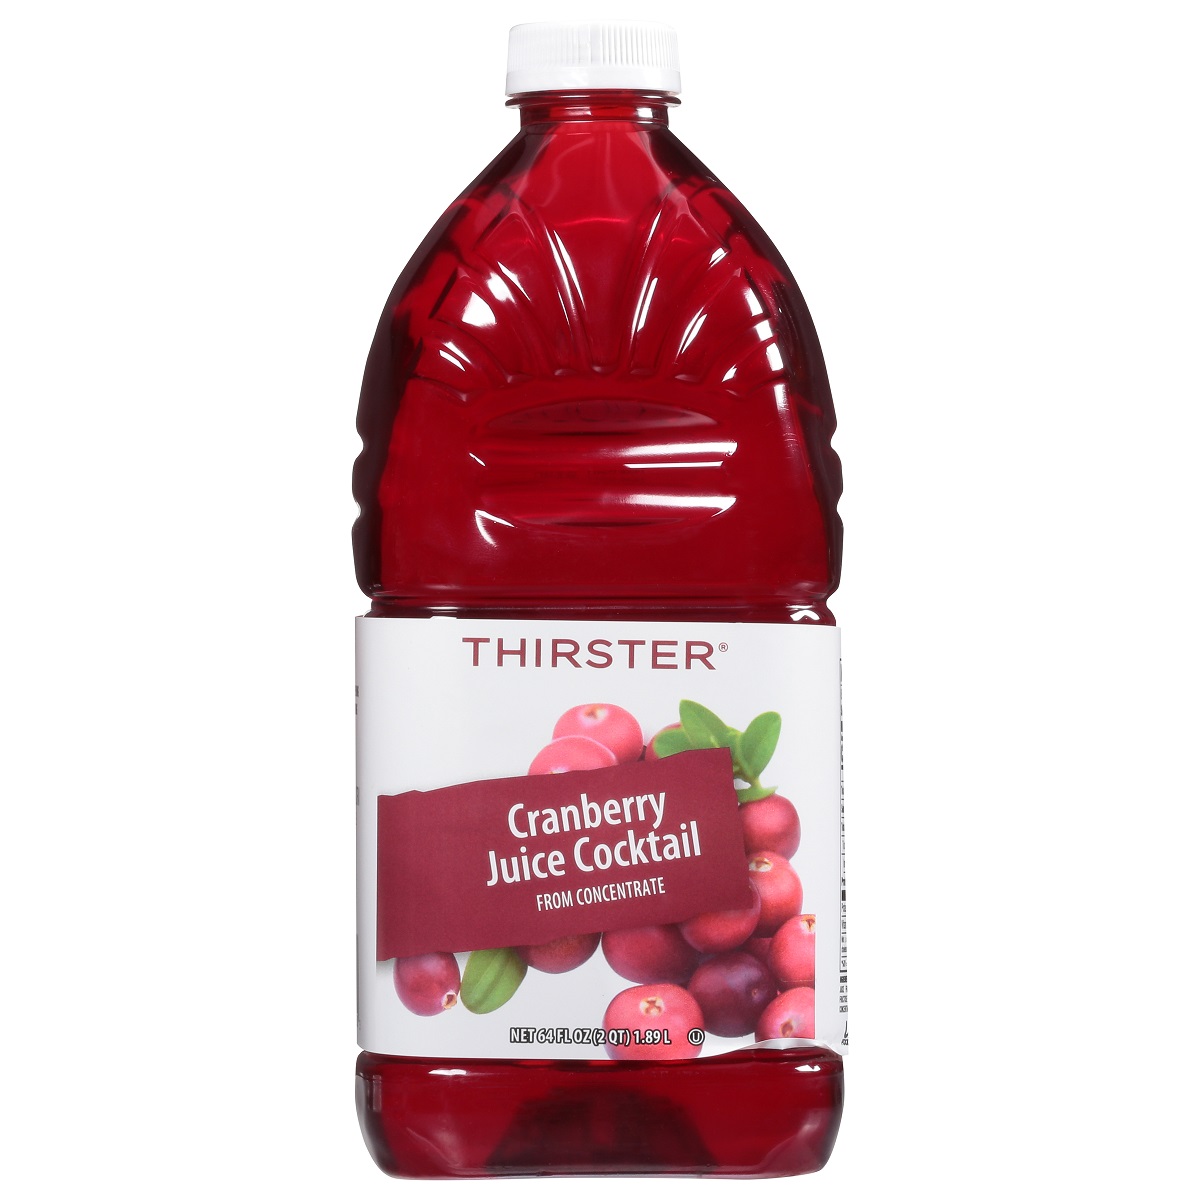 THIRSTER SHELF STABLE CRANBERRY JUICE 27%